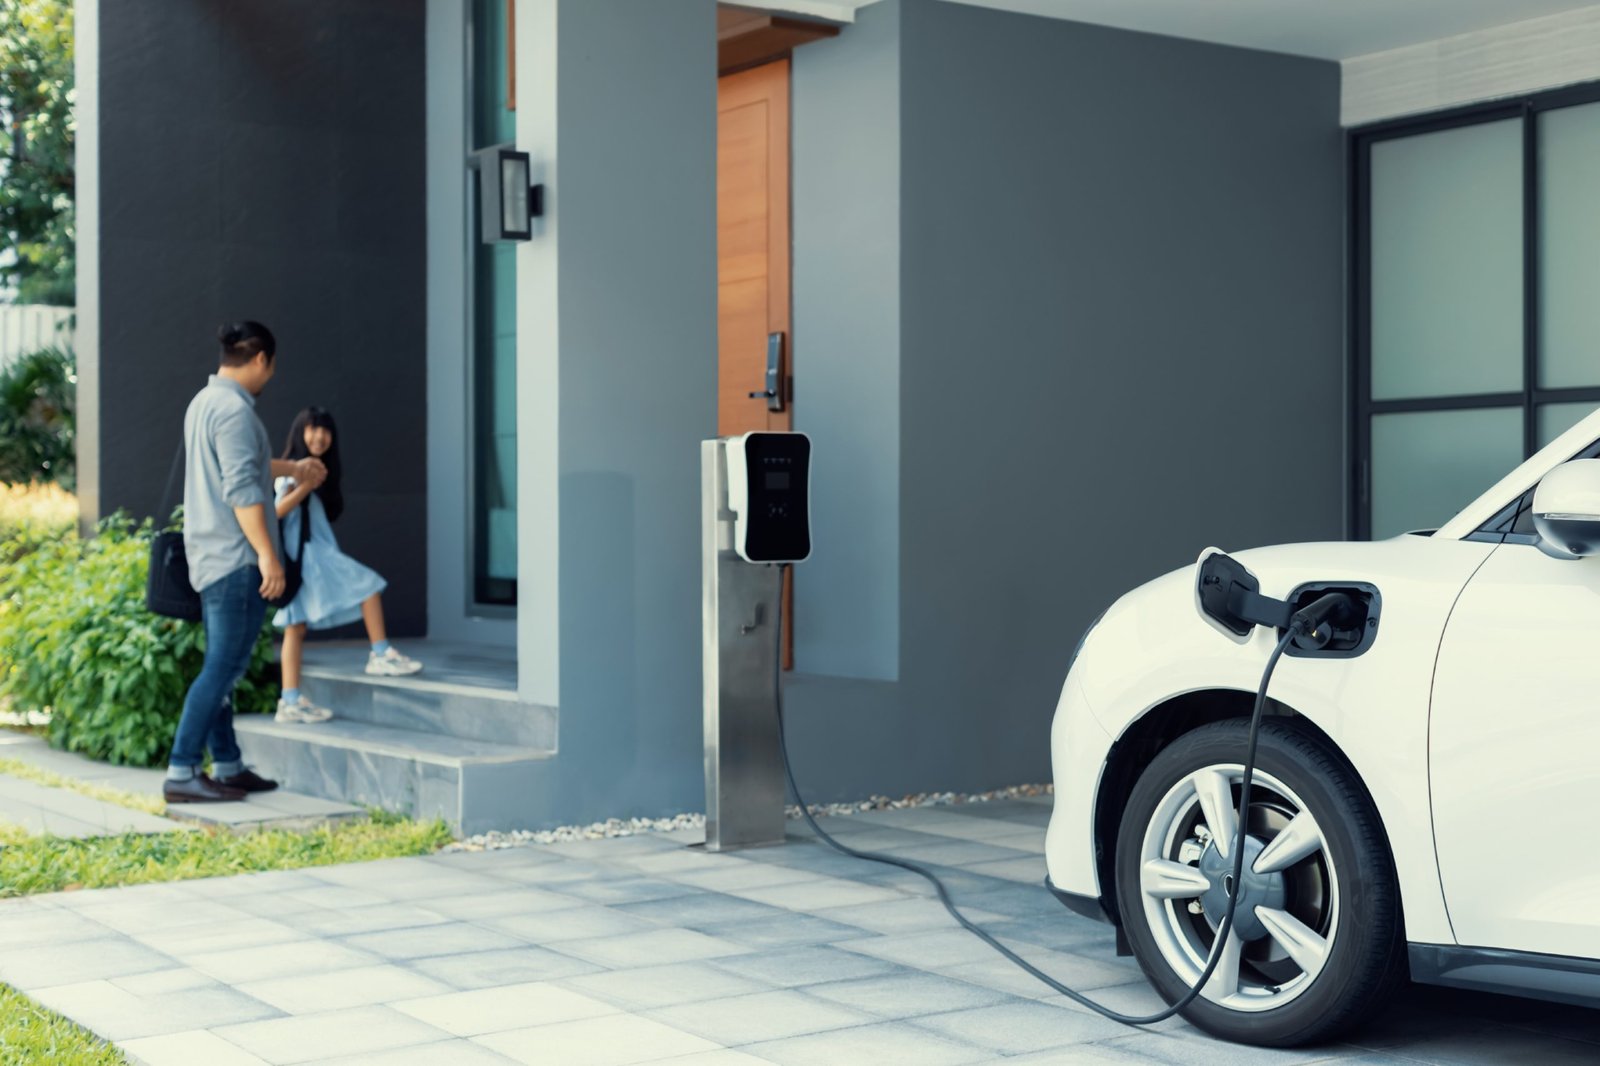 What Are The Considerations For Installing A Home Charging Station For Electric Vehicles?